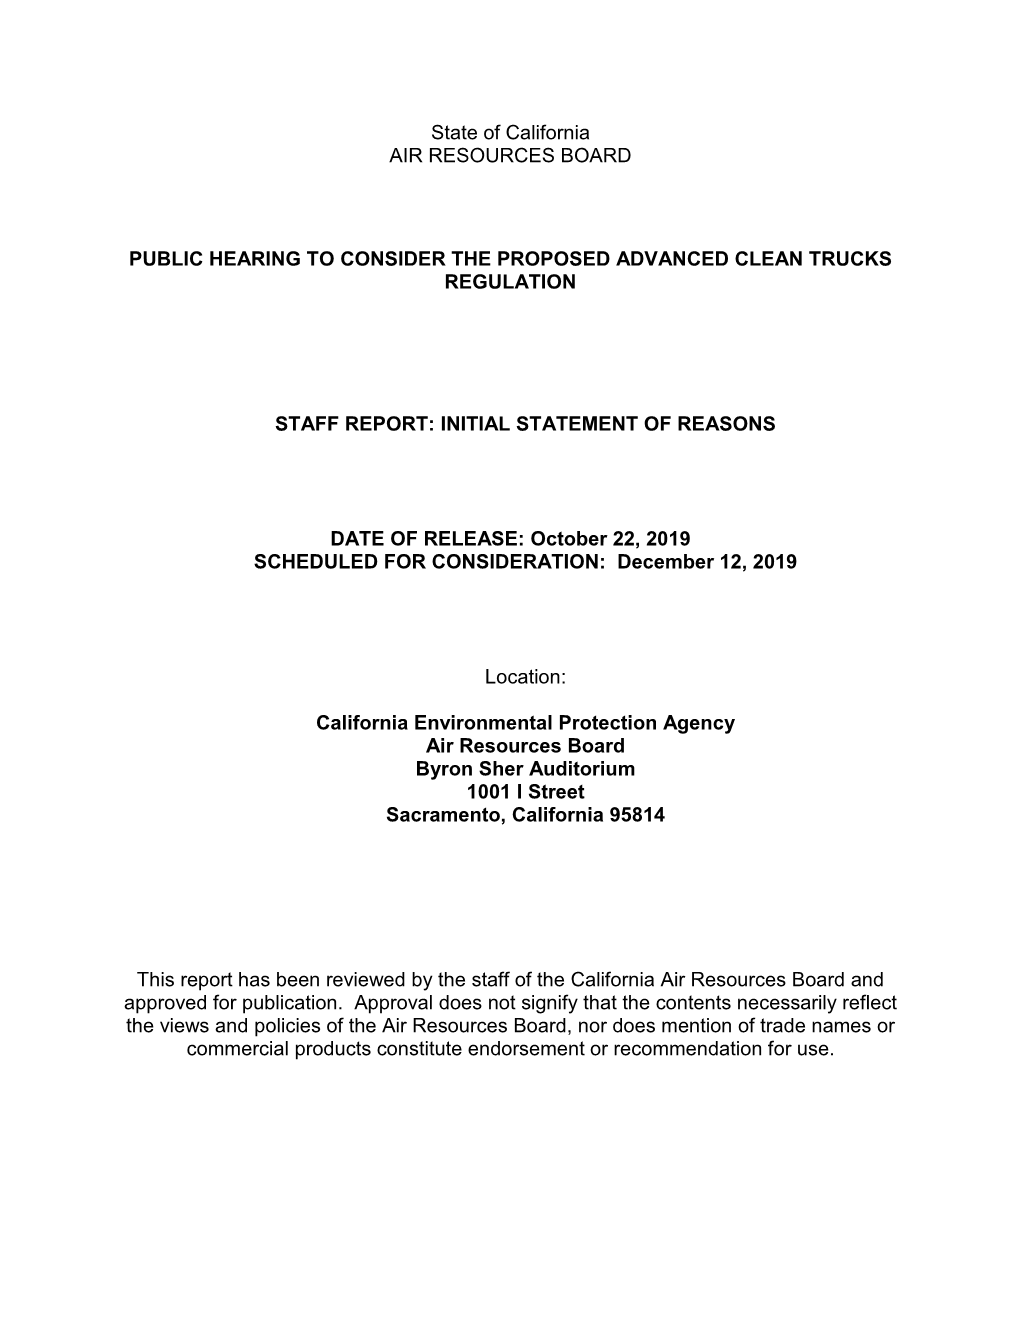 Public Hearing to Consider the Proposed Advanced Clean Trucks Regulation Staff Report